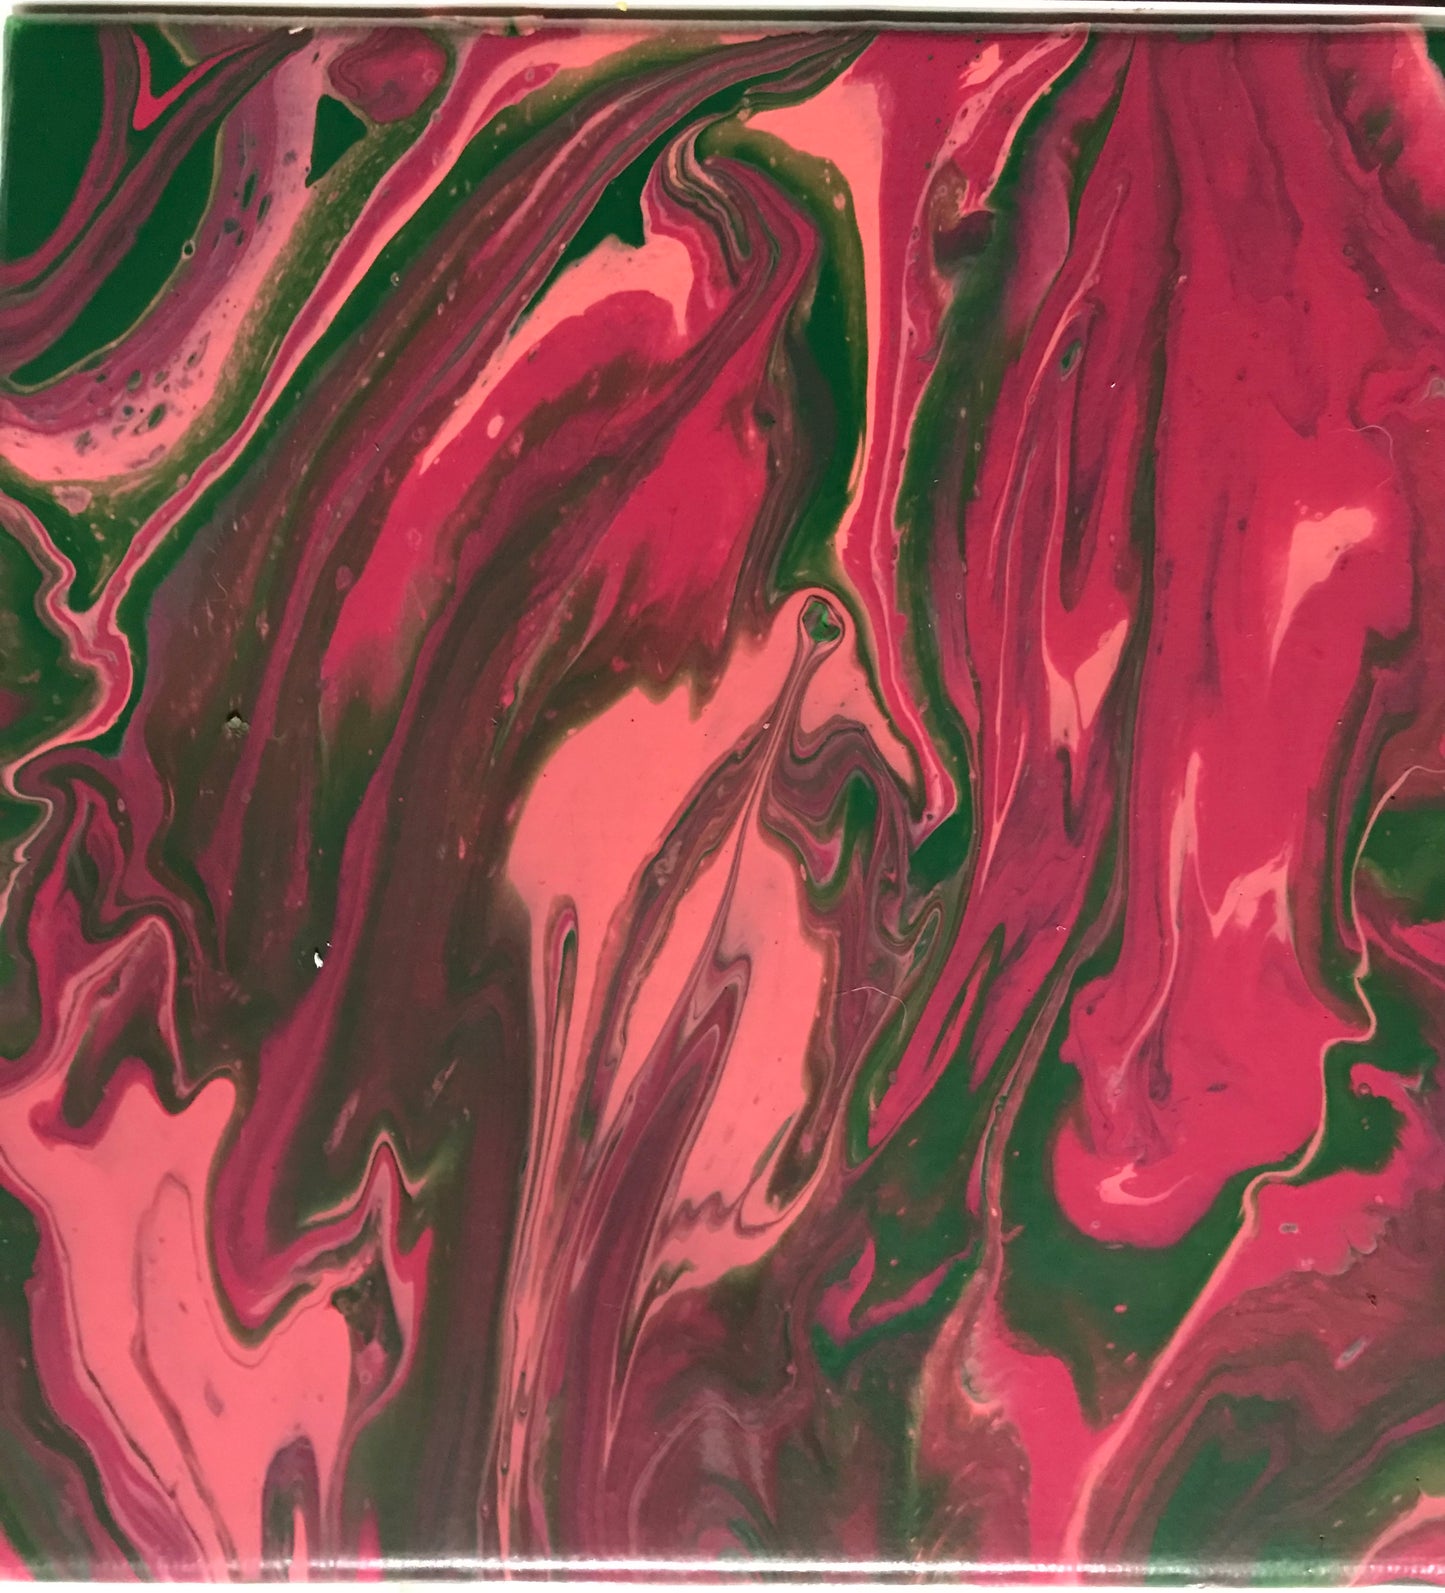 Sun, Oct 17, 1-3p “Art & Science: Acrylic Pour” Private Kids Painting Party